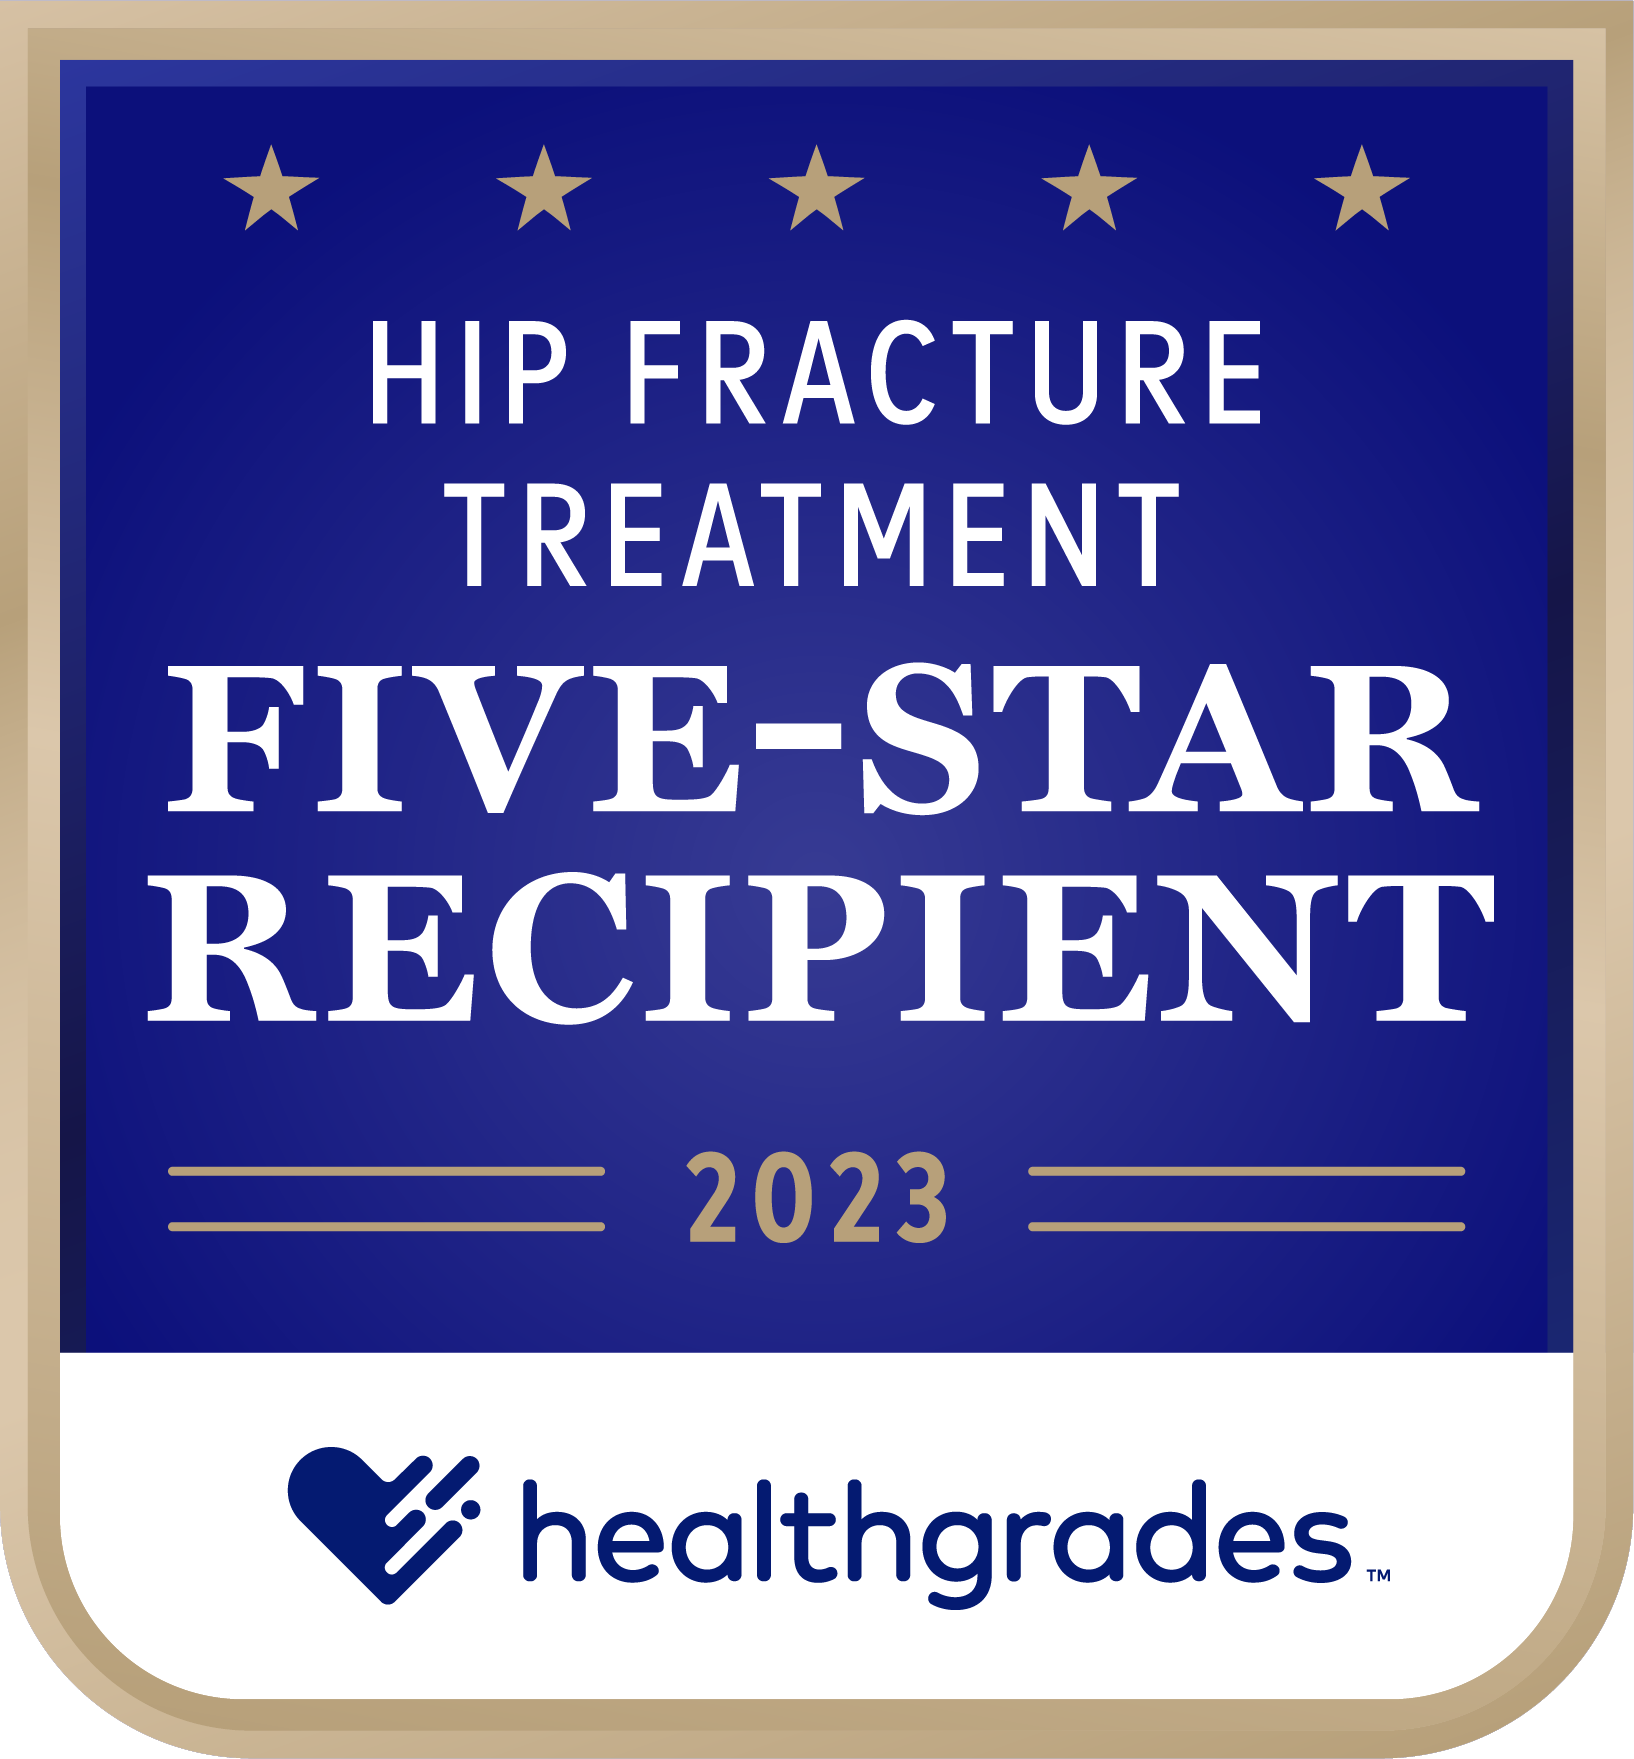 Healthgrades 2023 Five-Star for Hip Fracture Treatment